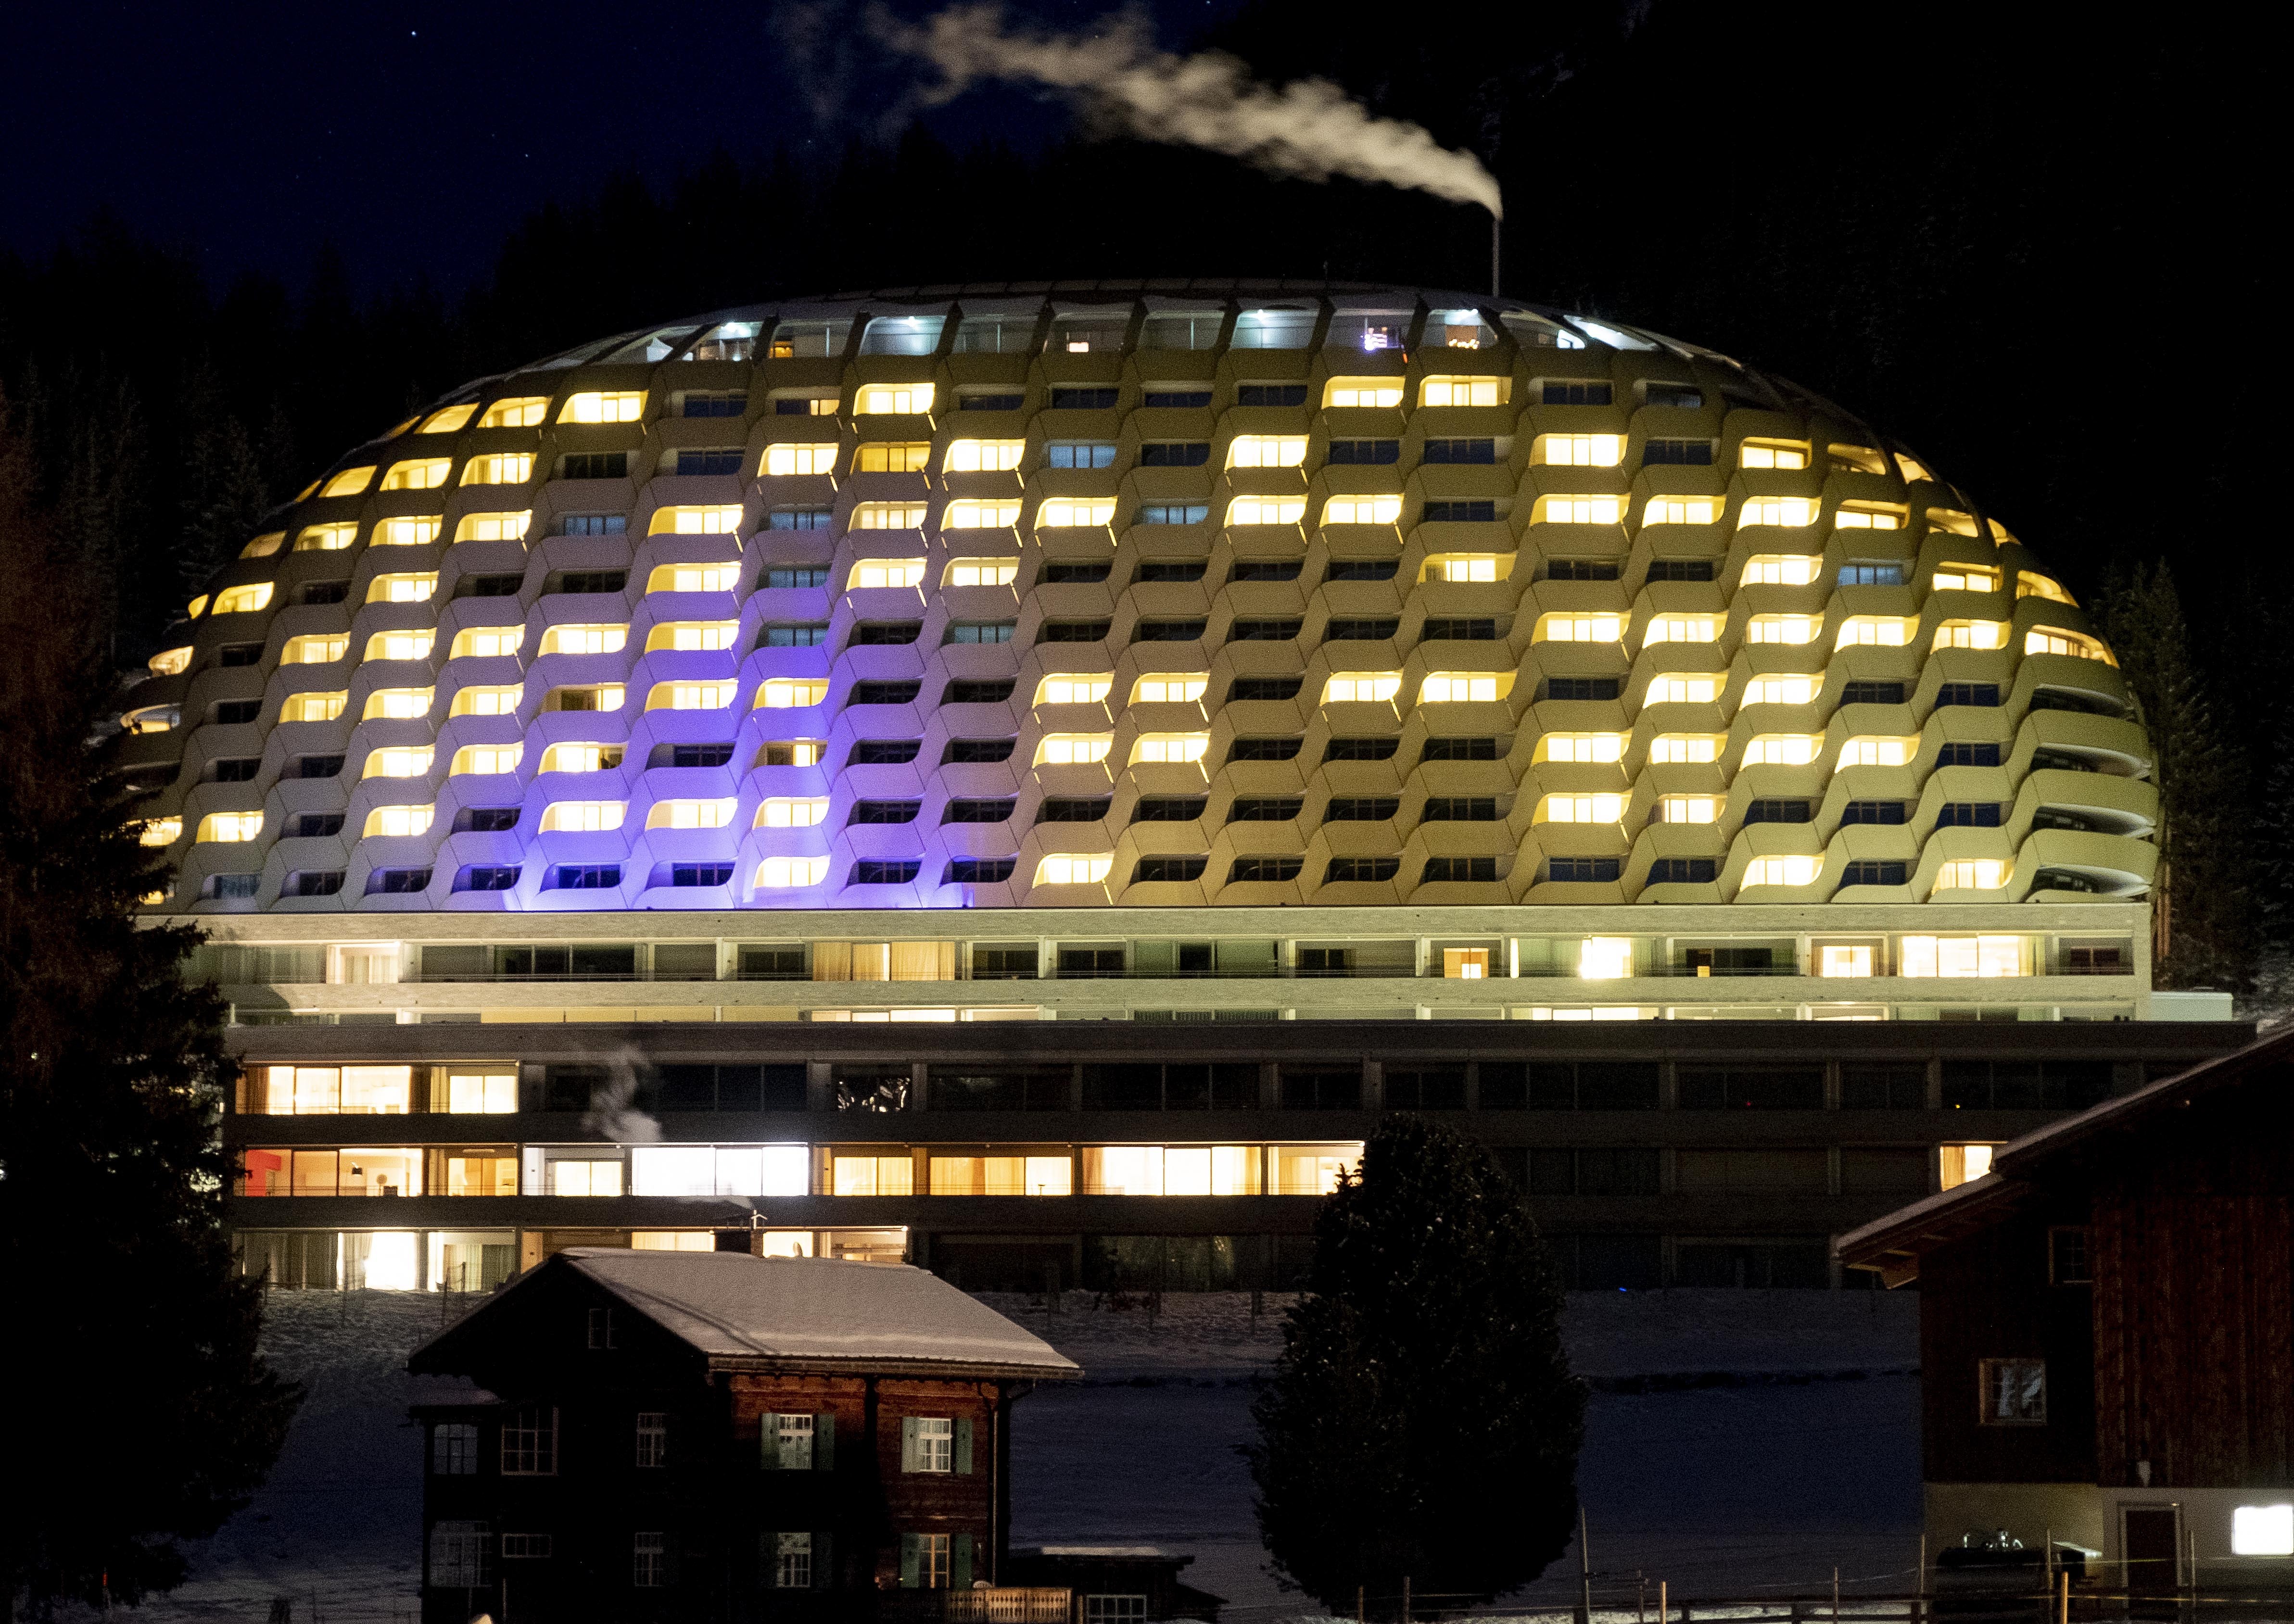 The hotel Intercontinental is seen in Davos, Switzerland, Monday, Jan. 20, 2020.  US President Donald Trump is due to stay at the hotel for one night during his two-days visit to the World Economic Forum. The World Economic Forum will start on Tuesday. (AP Photo/Michael Probst)